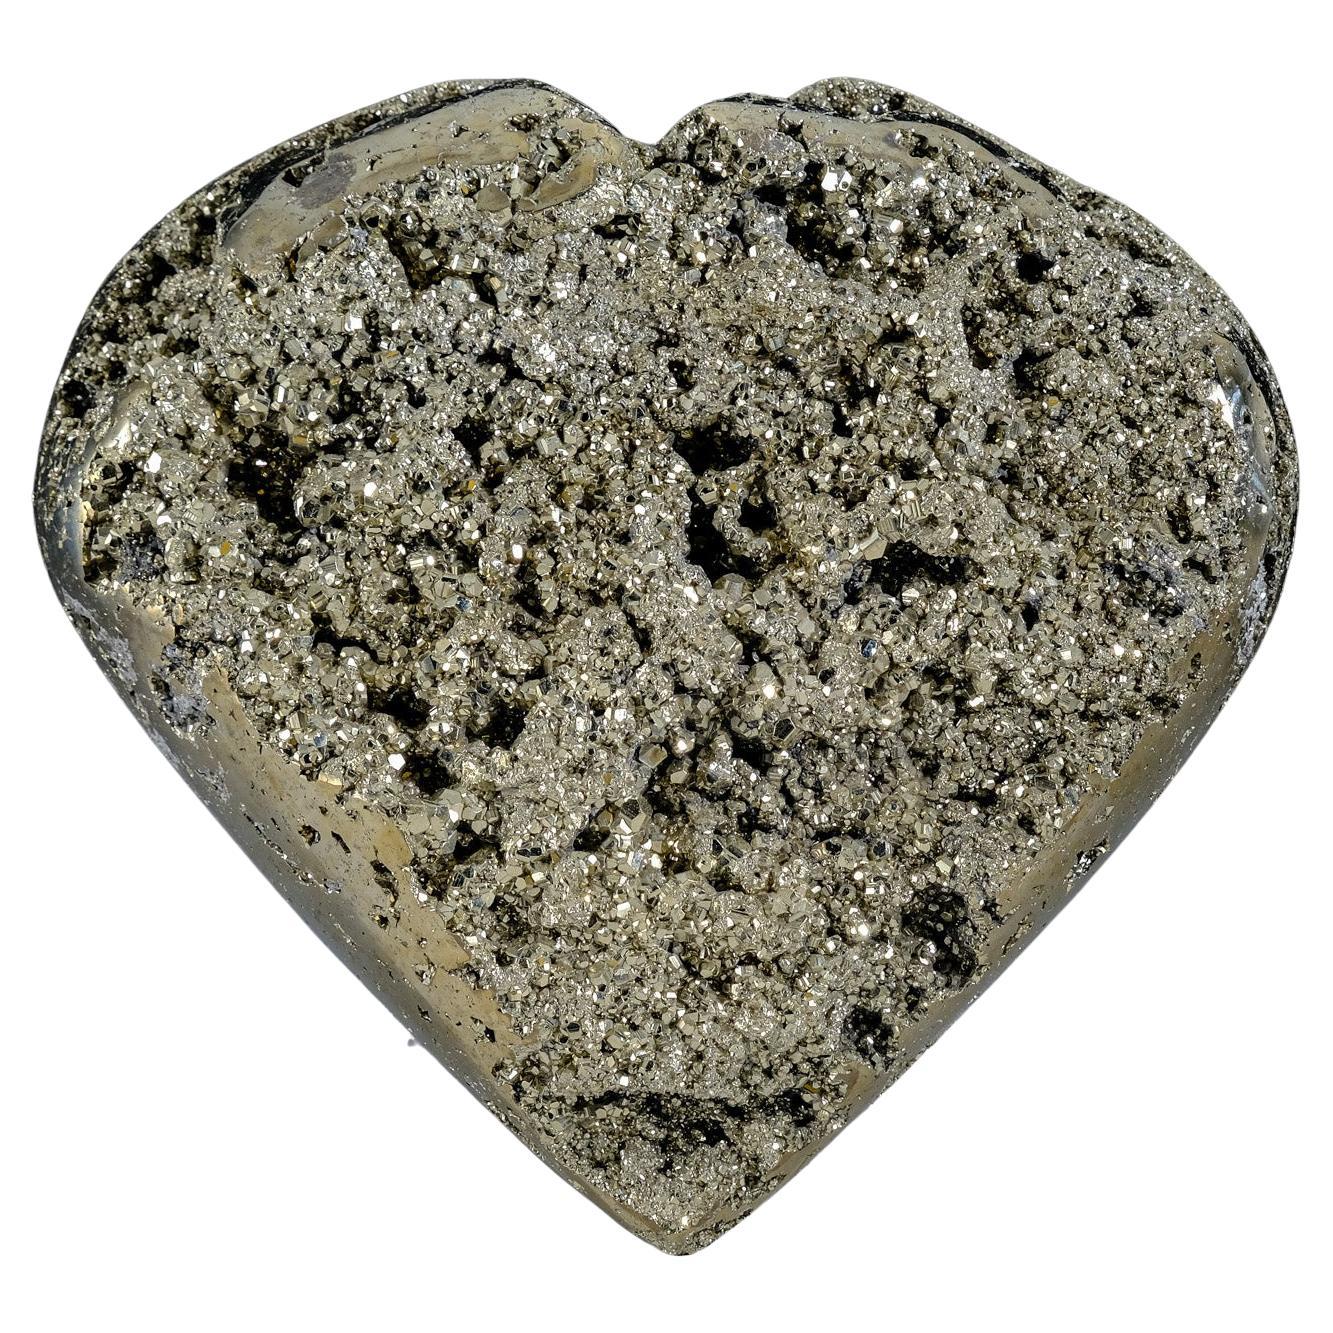  Natural Pyrite Cluster Heart (7 lbs) For Sale